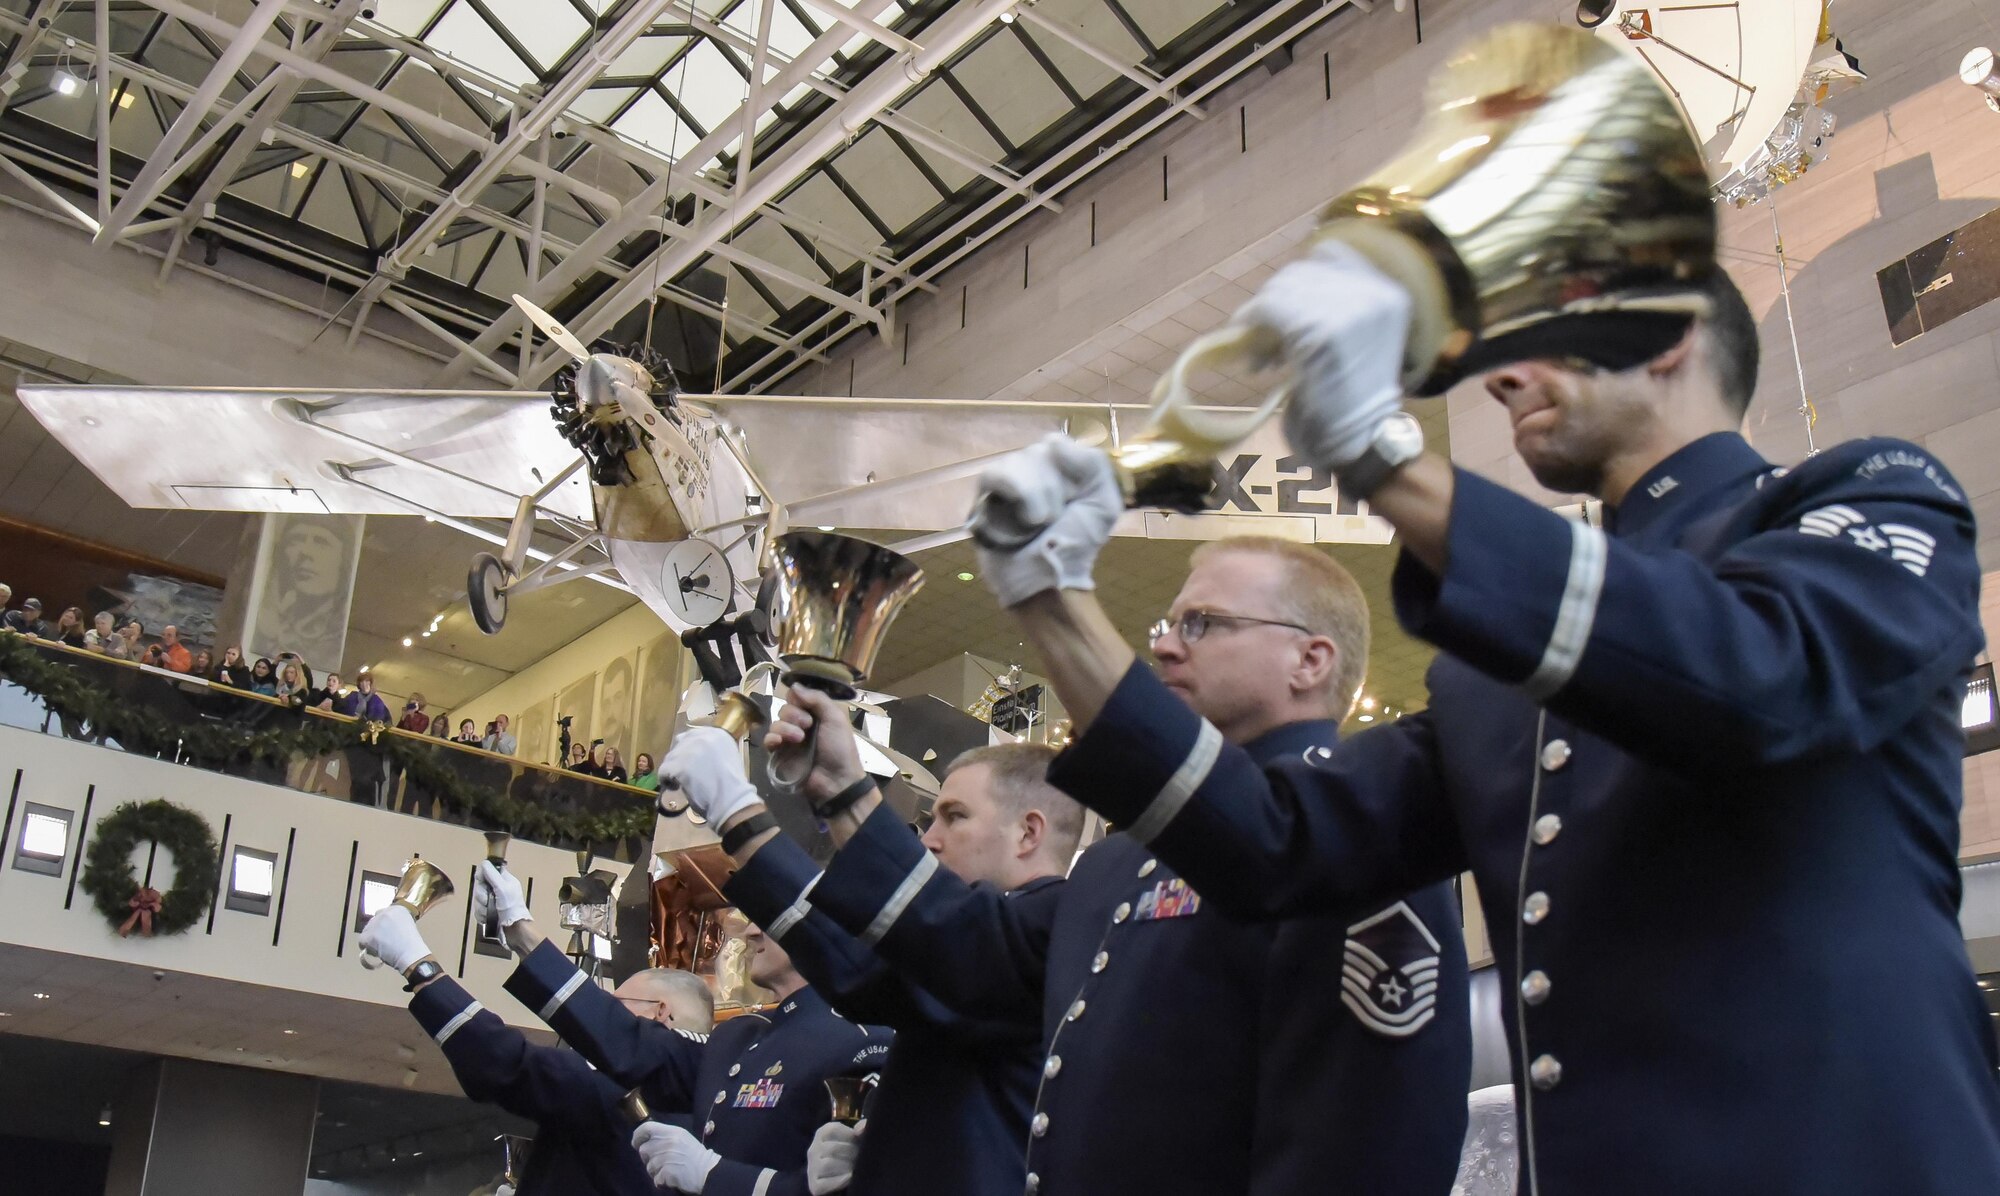 U.S. Air Force Band members play handbells during the band's annual holiday flash mob performance at the Smithsonian National Air and Space Museum in Washington, D.C., Nov. 29, 2016. (U.S. Air Force photo by Jim Varhegyi)(released)